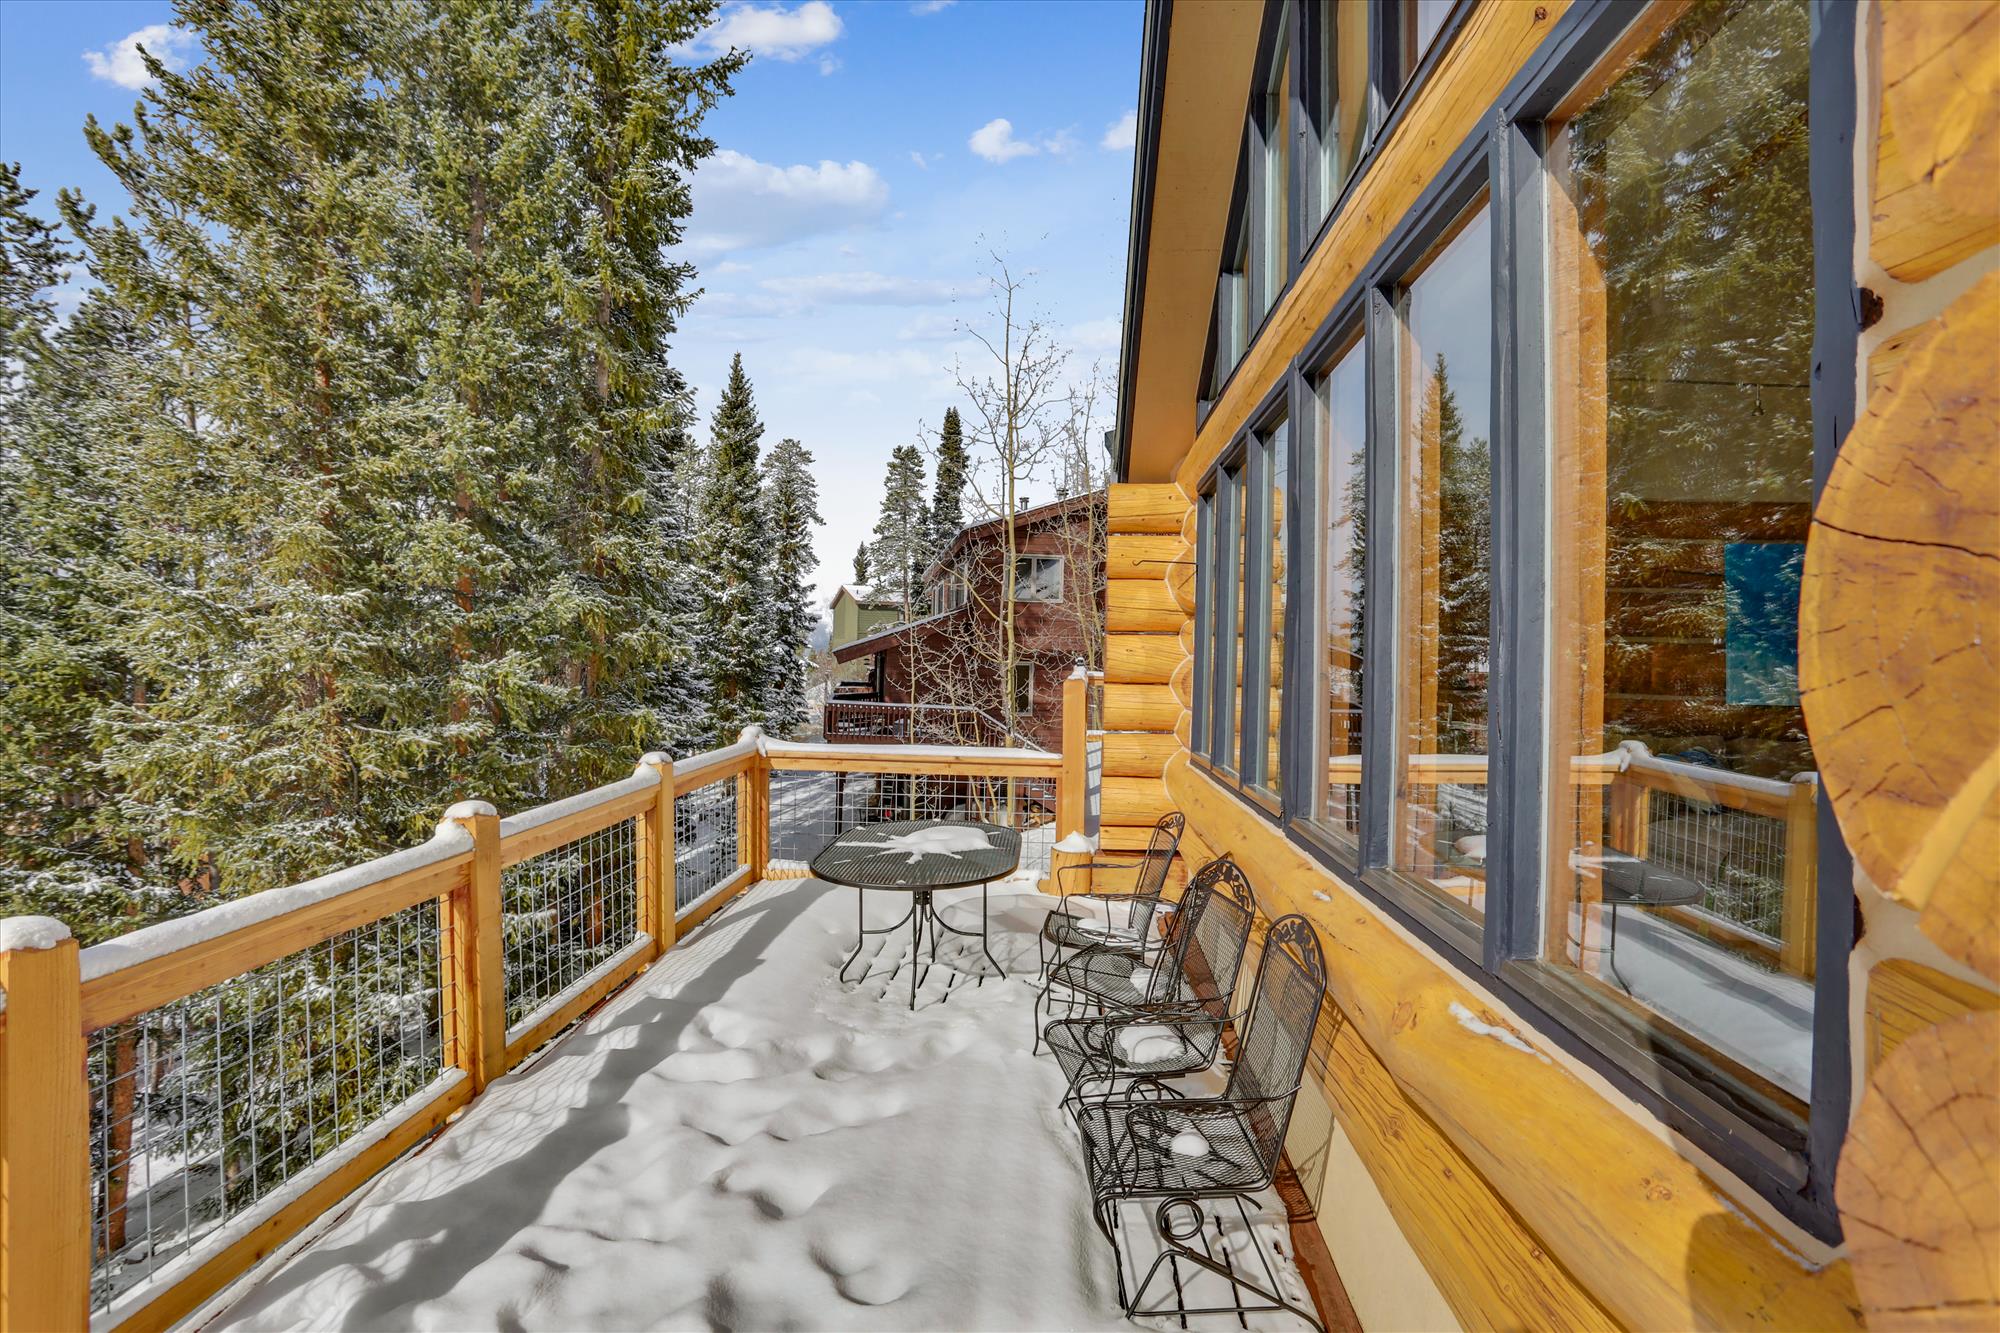 Additional views of the outdoor seating/deck area - 10 Southface Breckenridge Vacation Rental